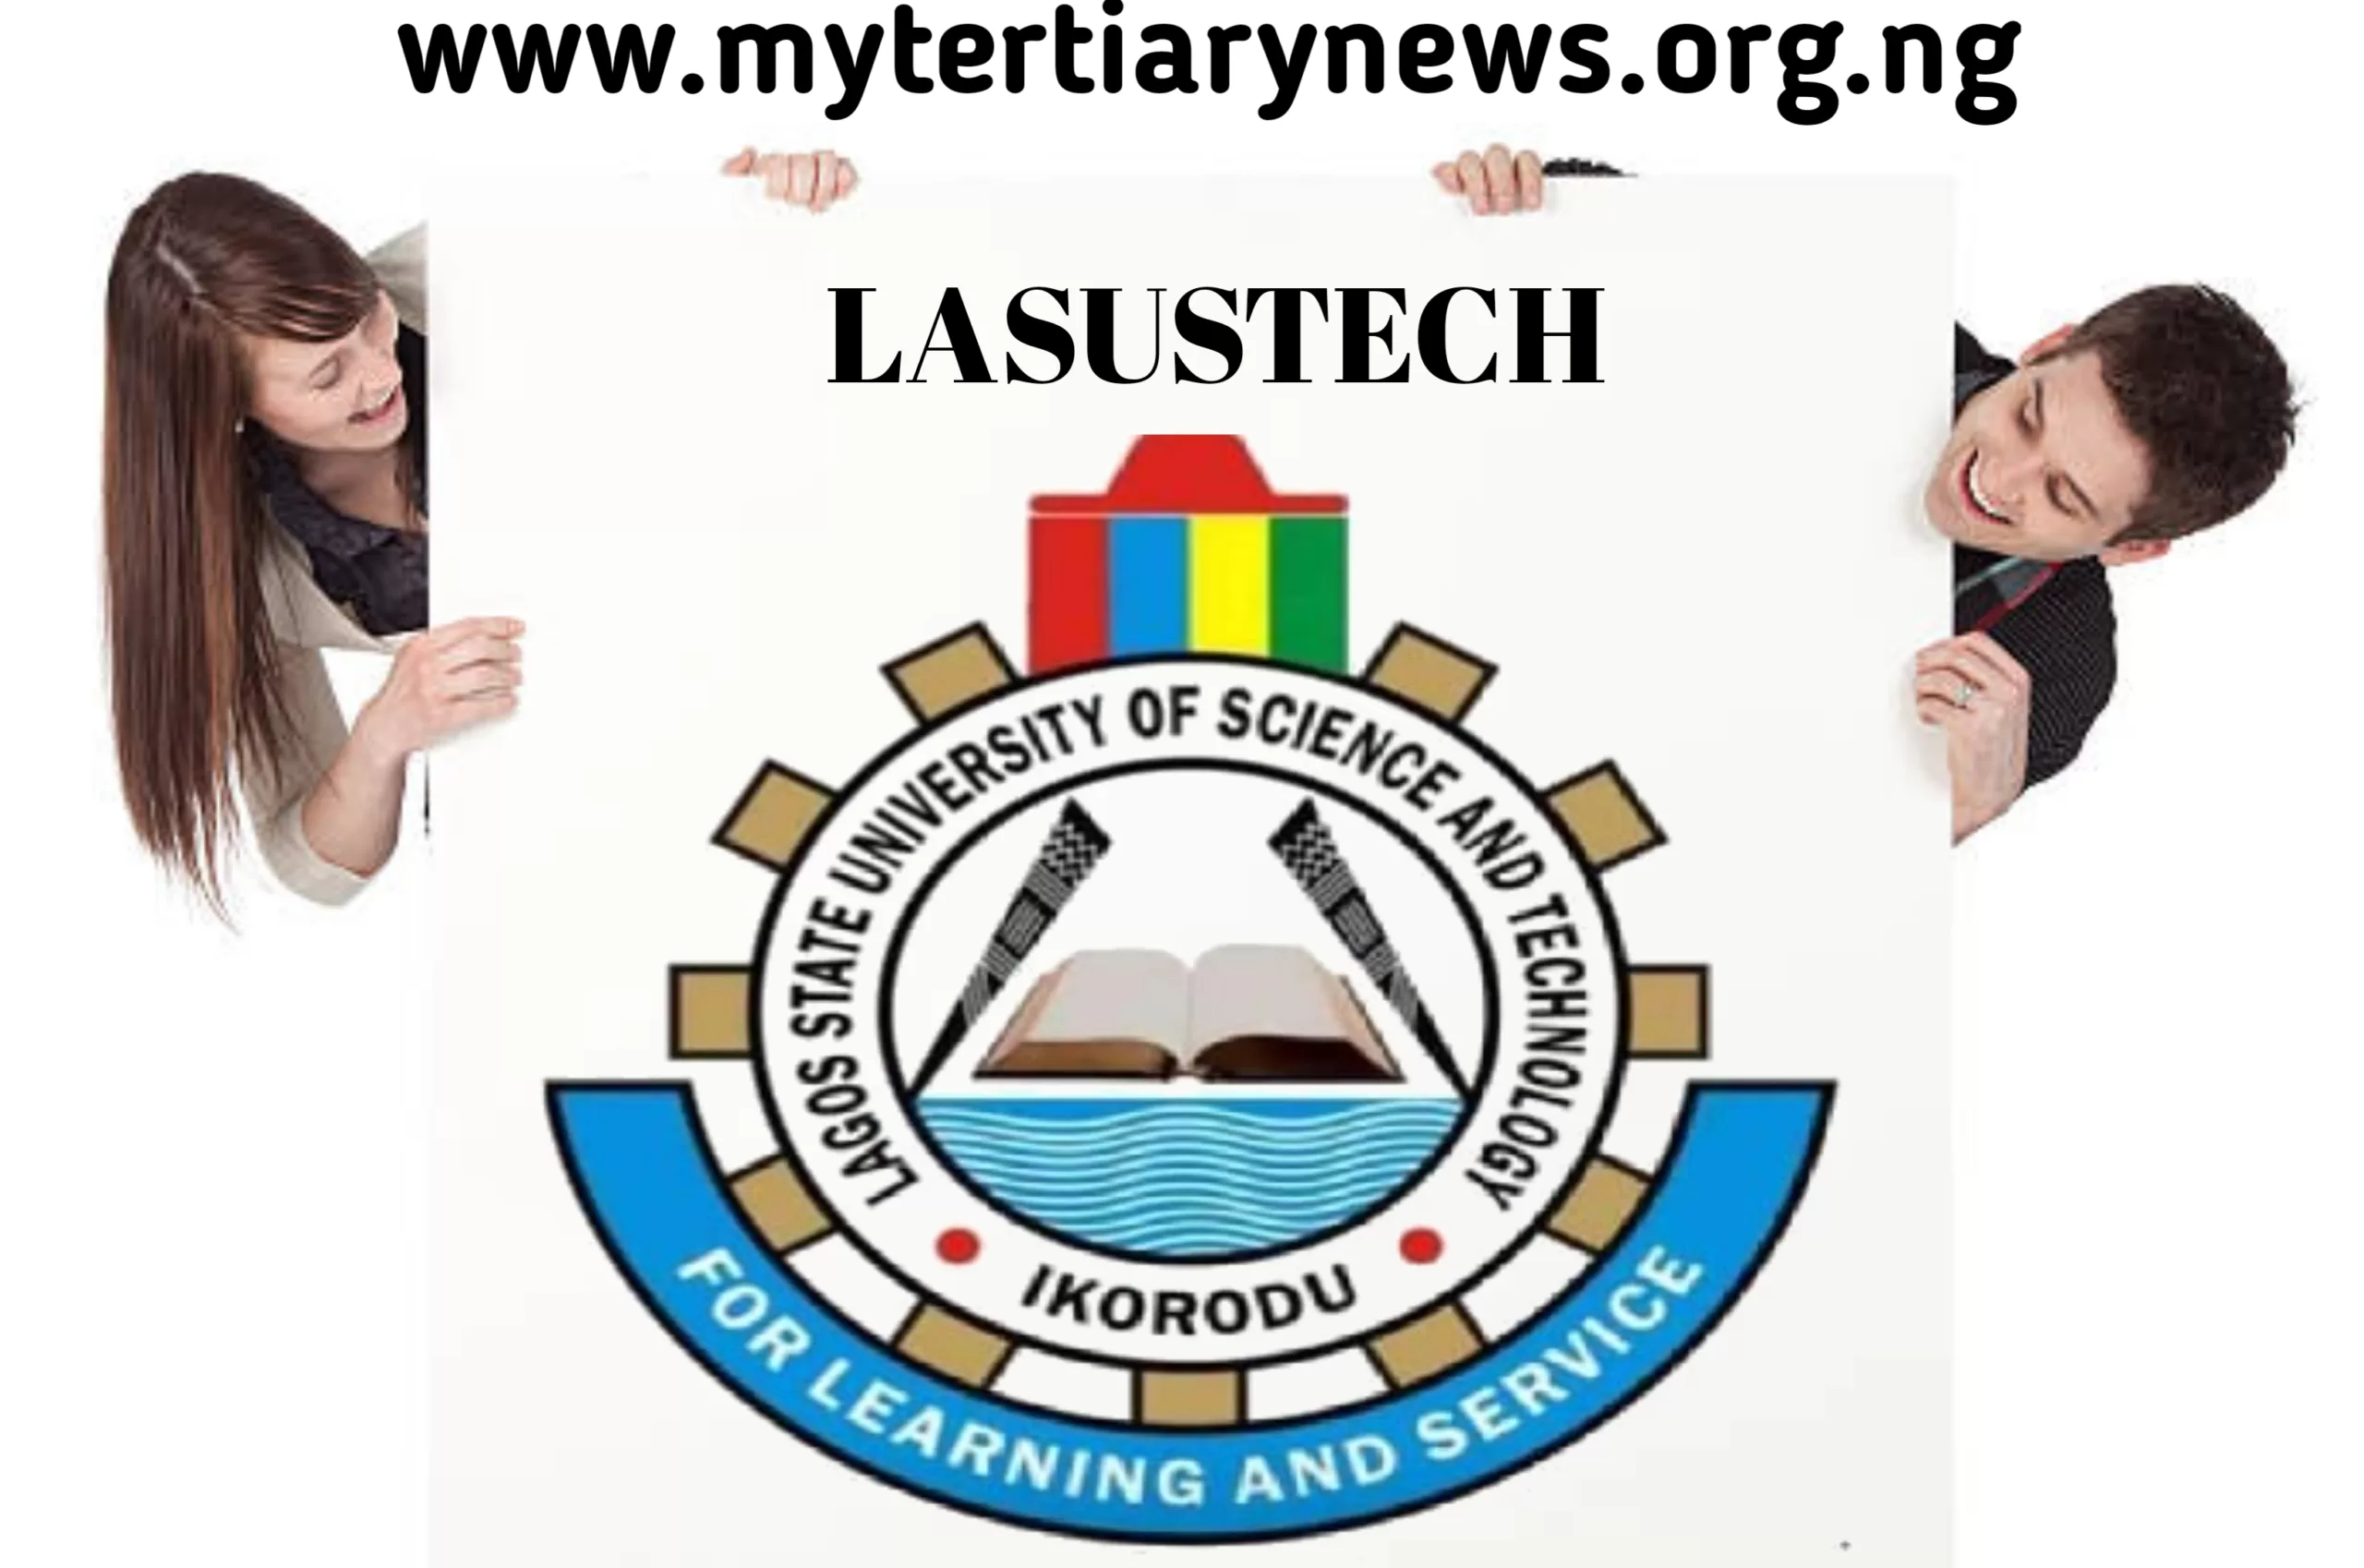 LASUSTECH Image || LASUSTECH Cut Off Mark for All Courses